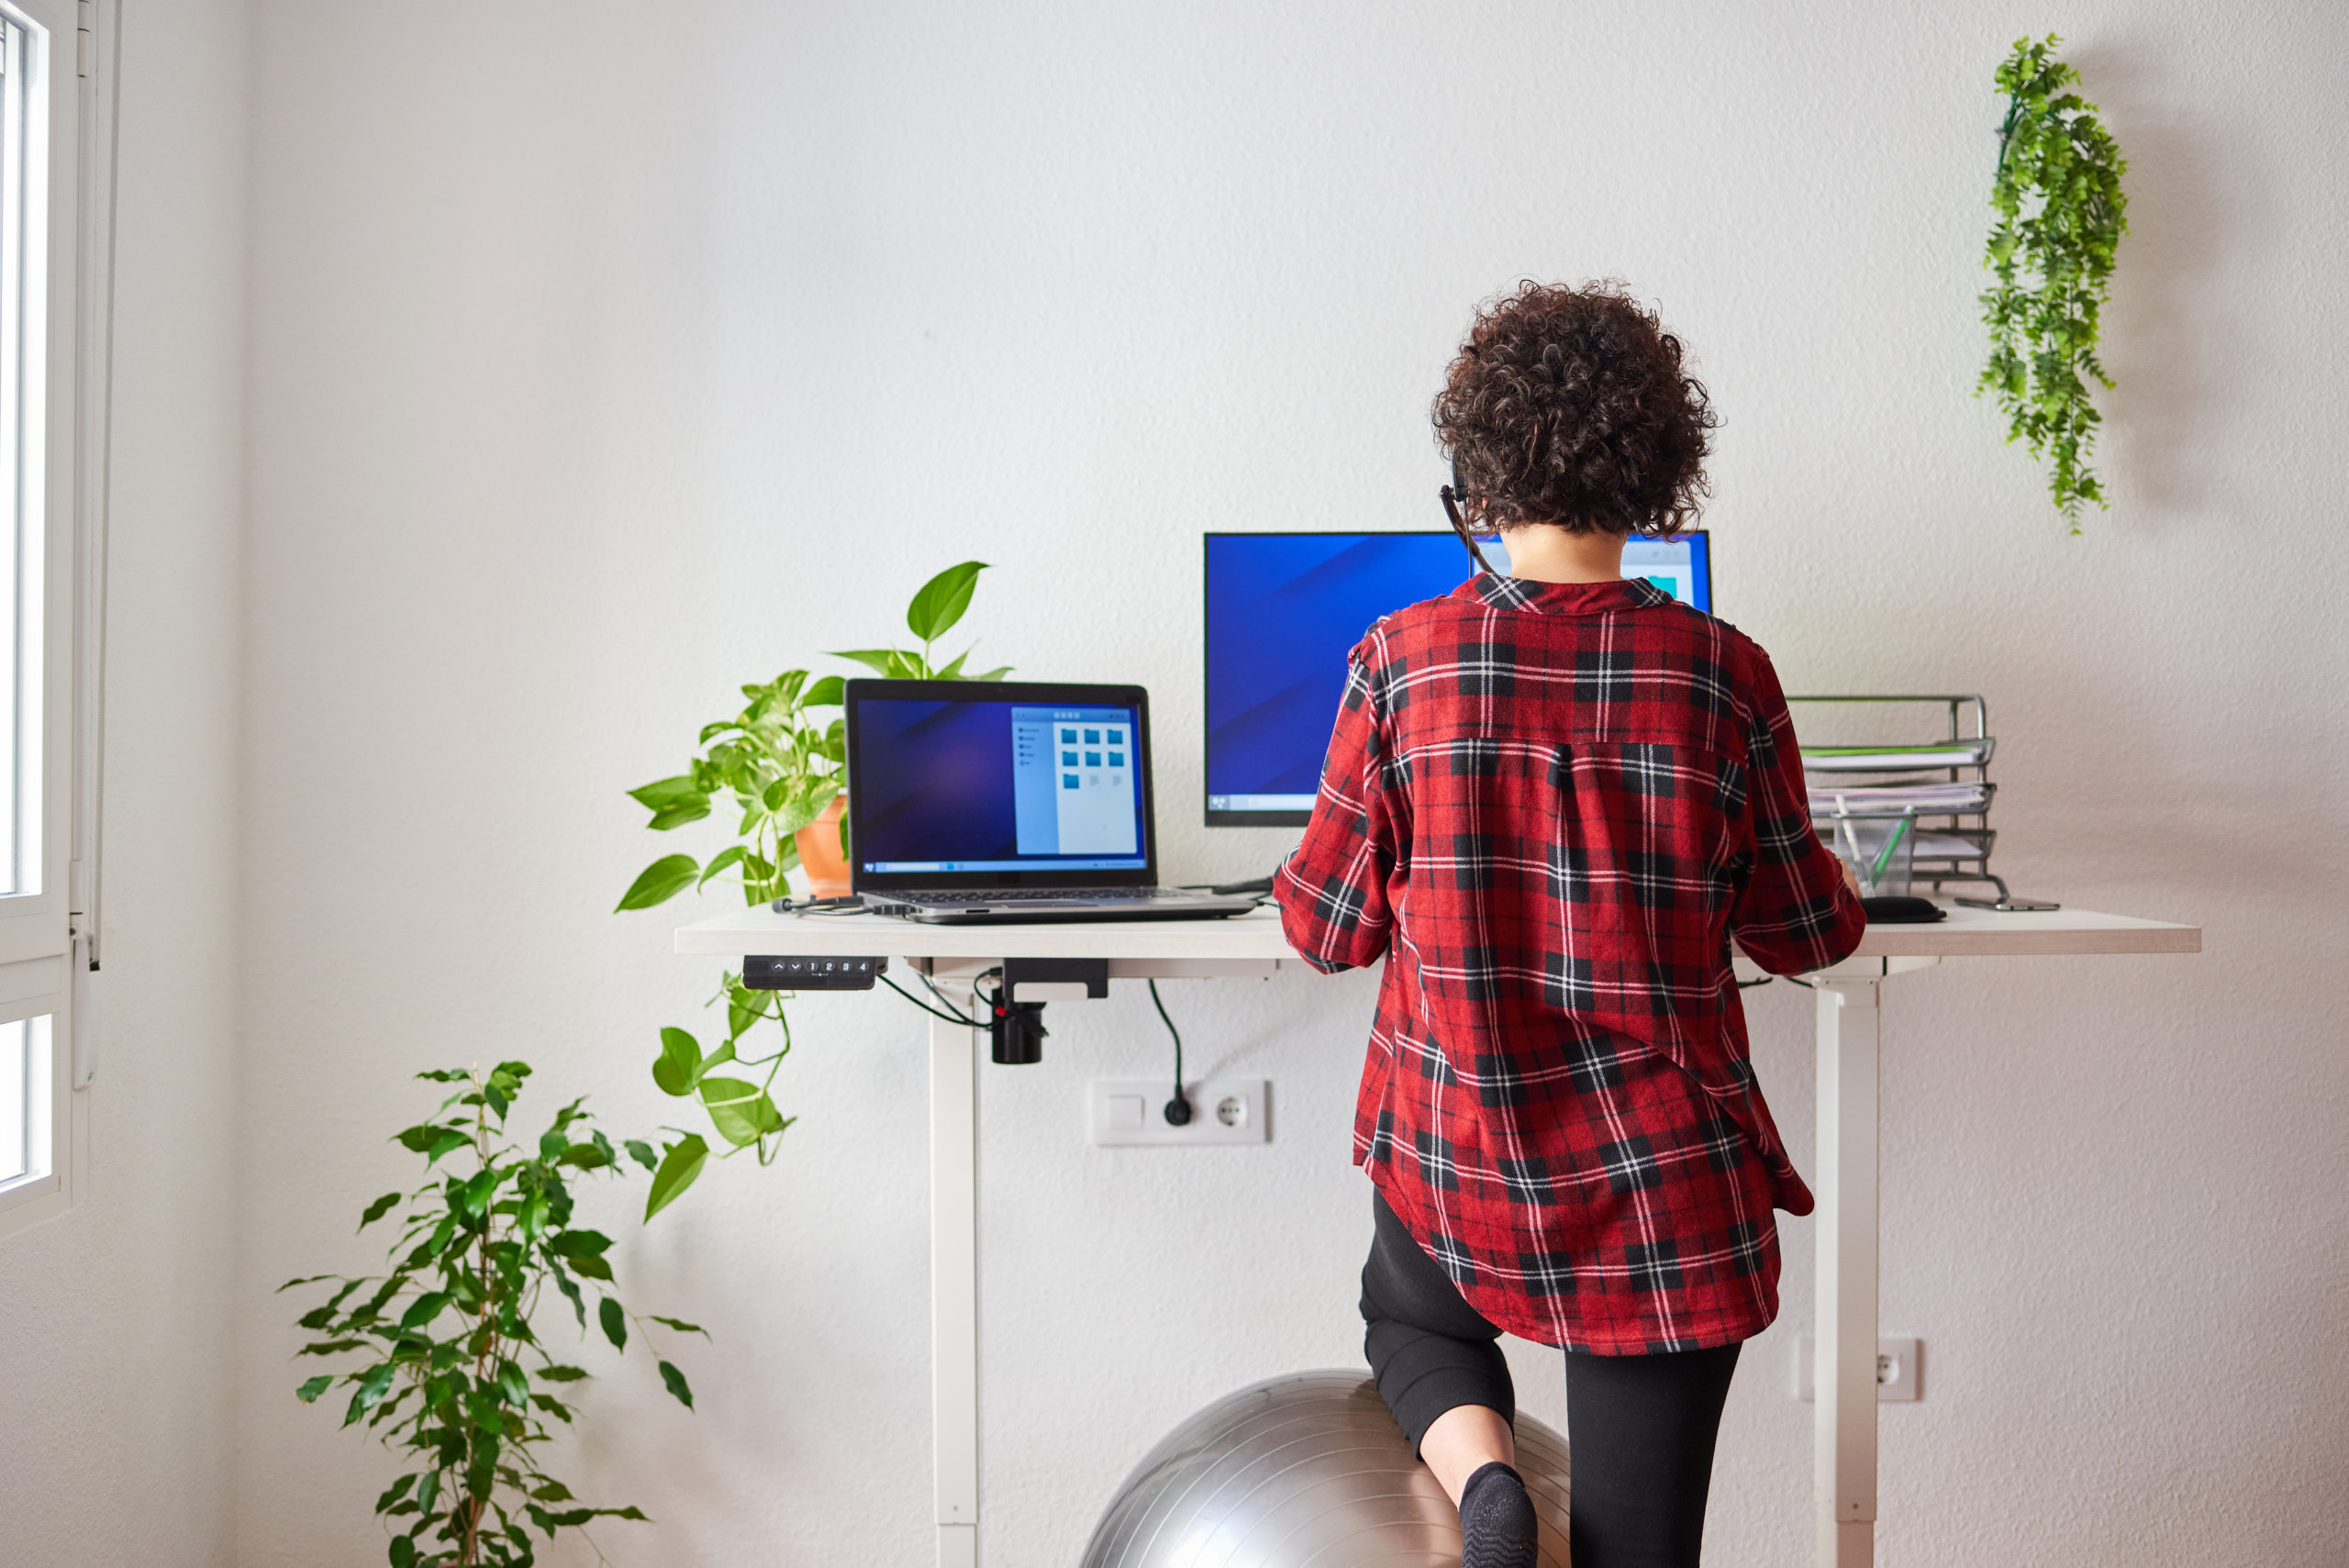 Features to Include in Your Ergonomic Workspace